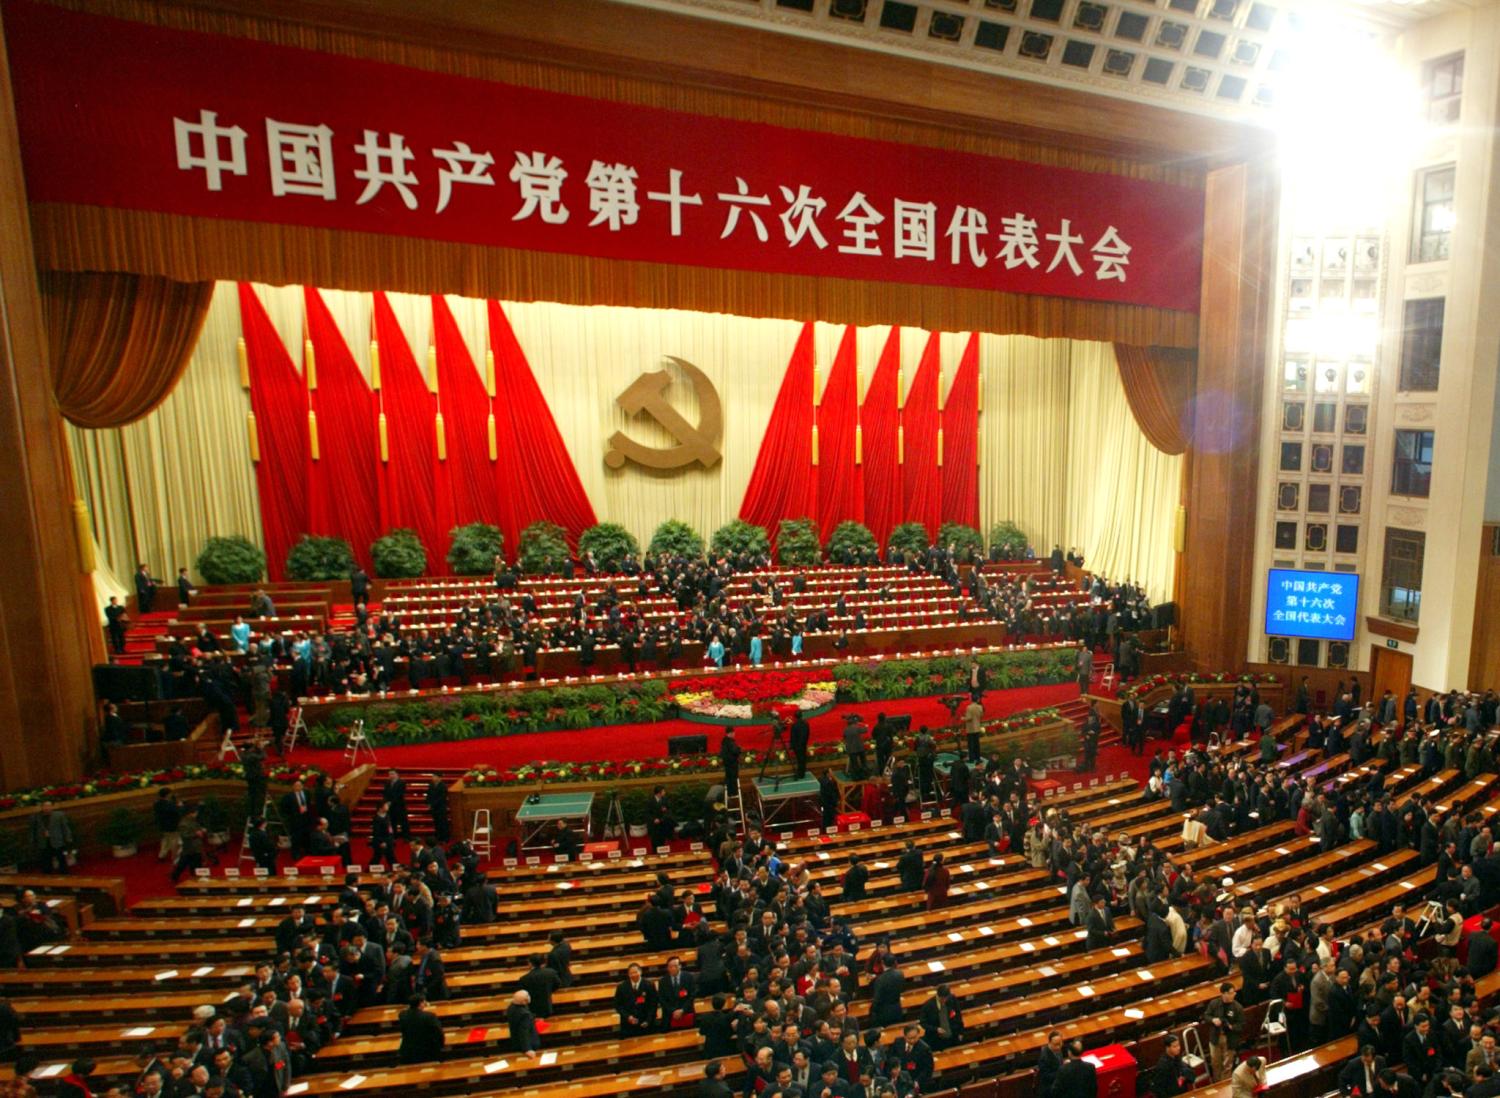 Delegates leaves the Great Hall of the People after the closing of closing the 16th Chinese Communist Party Congress in Beijing November 14, 2002. China confirmed on Thursday that President Jiang is retiring as Communist Party Chief and that he and top colleagues will hand over to a new generation of leaders under Vice President Hu Jintao. REUTERS/Guang Niu ASW/PB - RTRDTKT